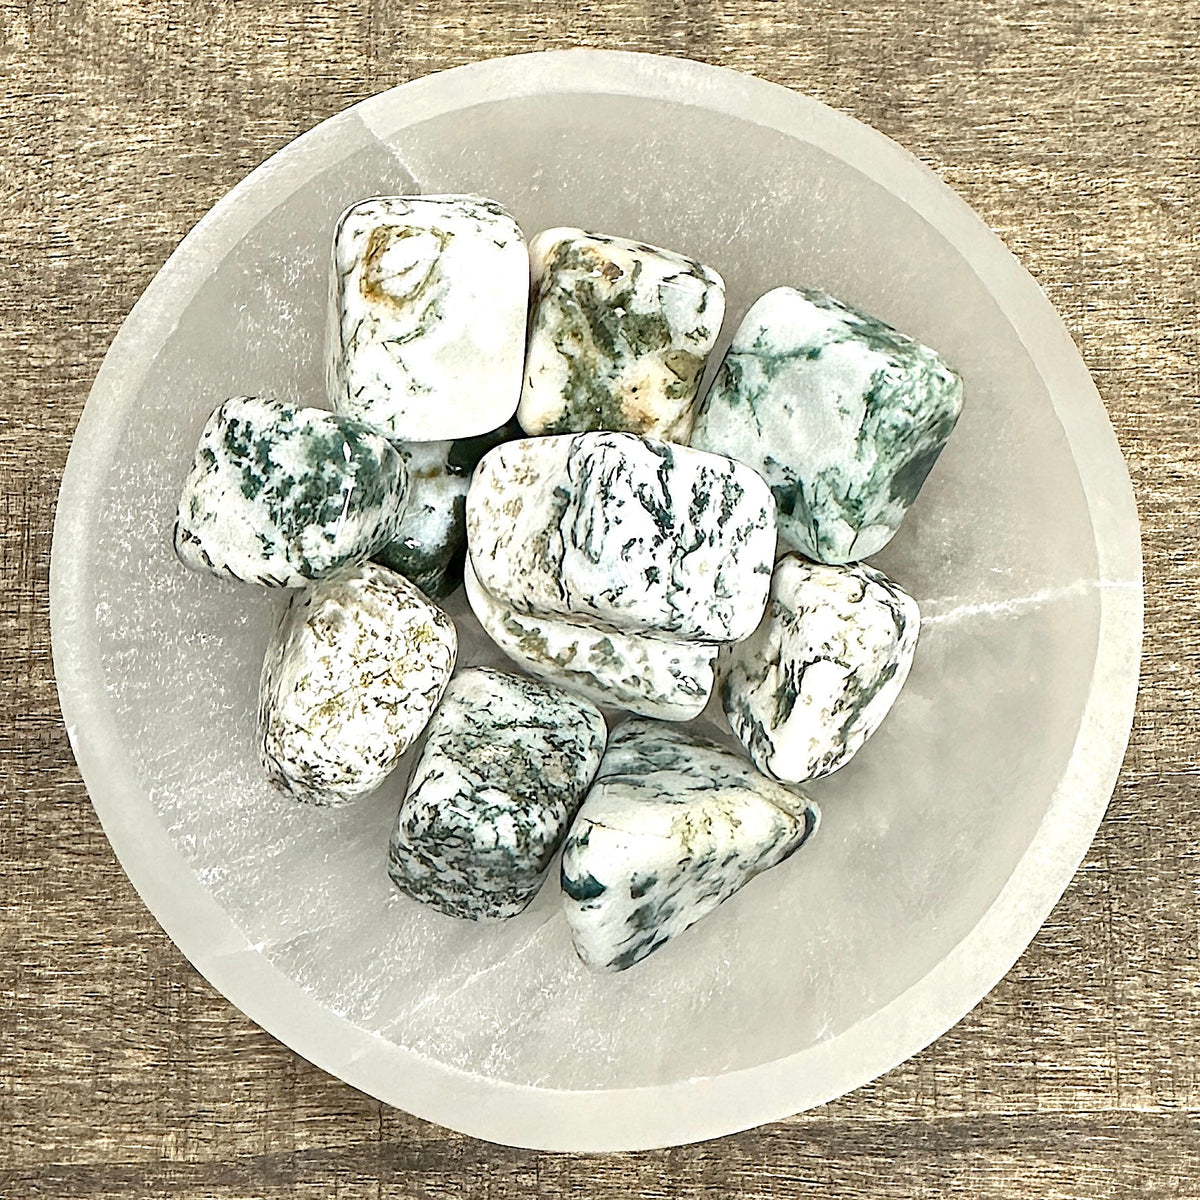 Overhead shot of various Tree Agate tumbled stones in a small bowl.